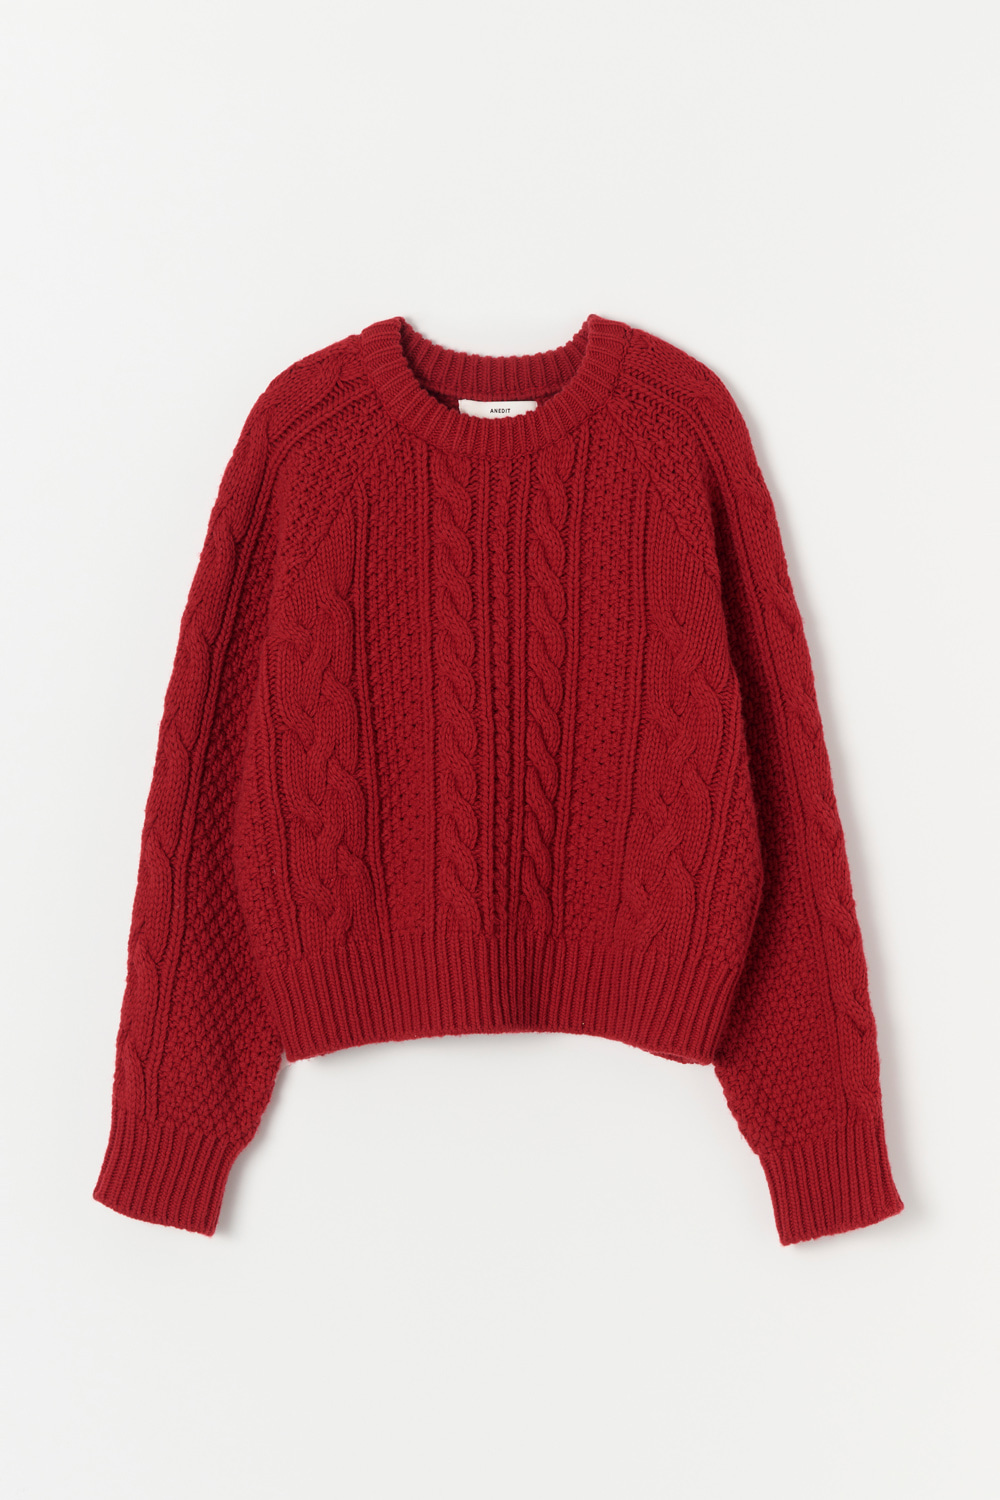 B Sophia Wool Cable Knit_Bohemian Red